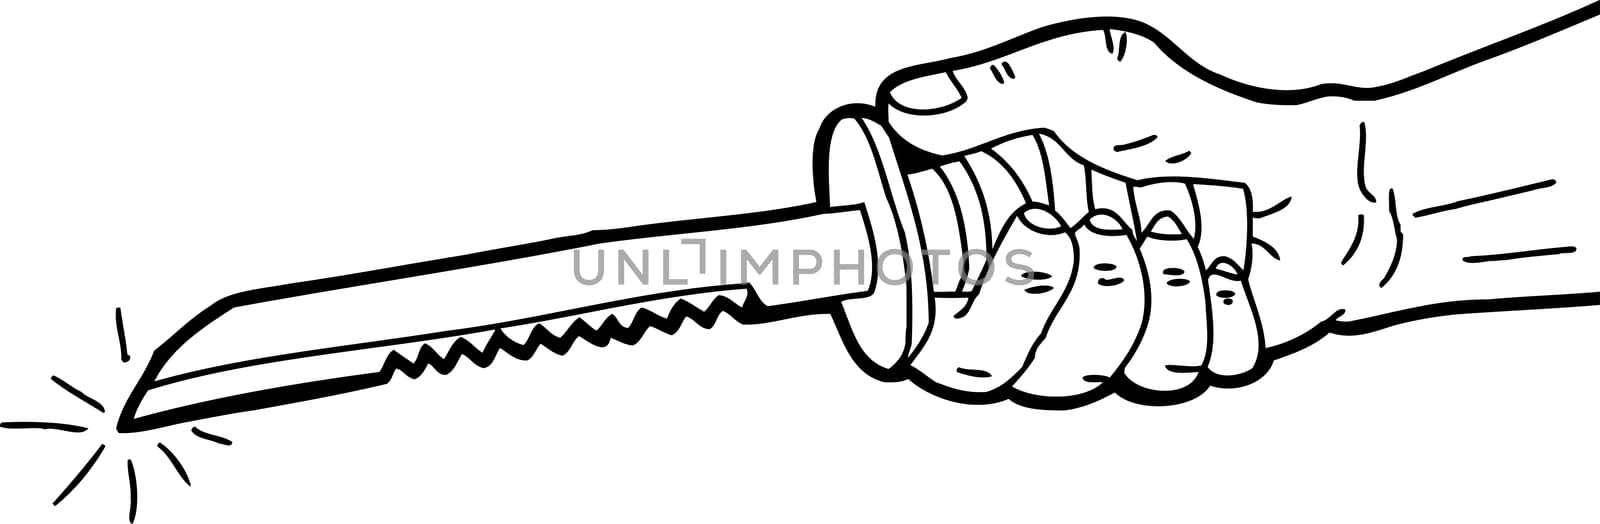 Hand drawn outline cartoon of person holding dagger